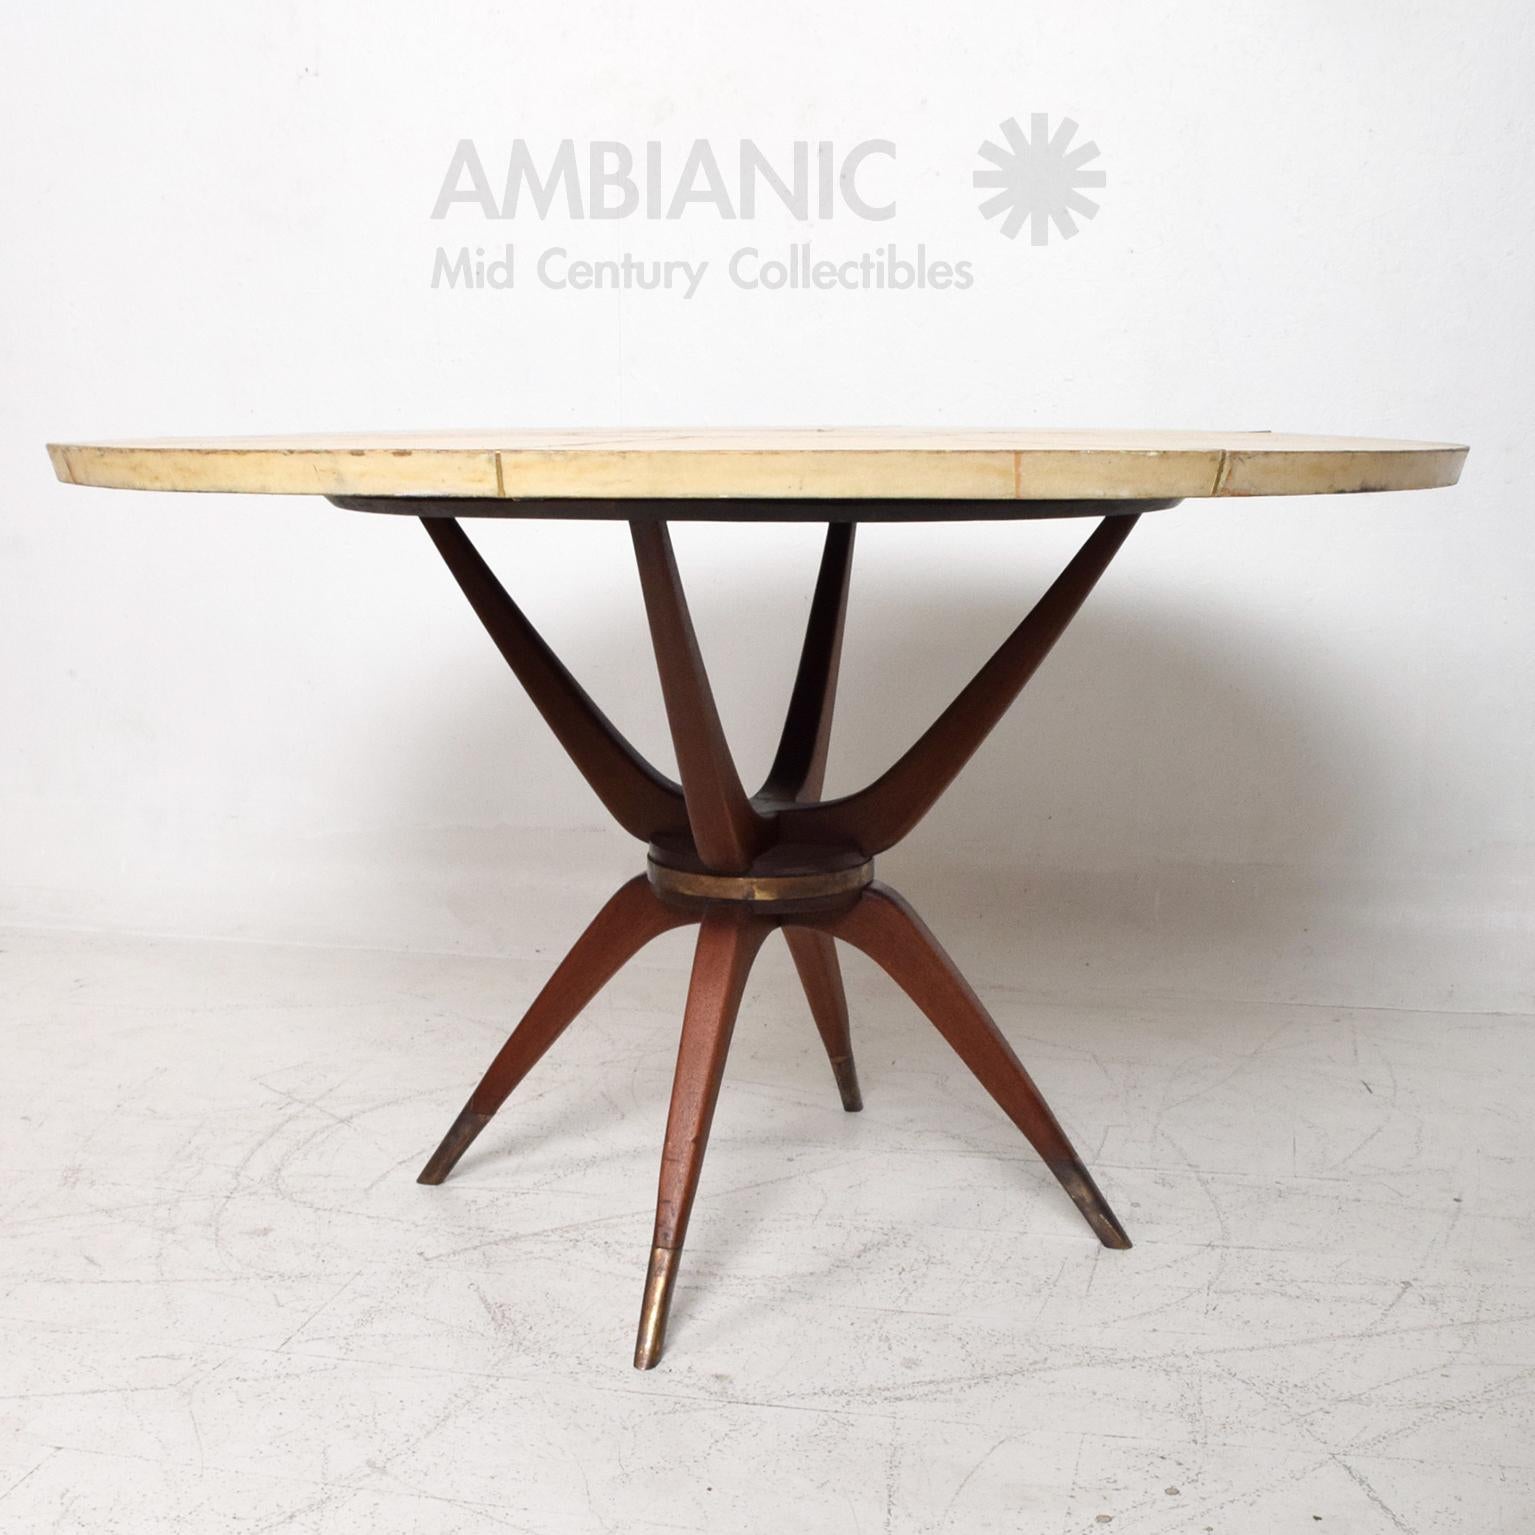 Splendid Round Dining Table in Goatskin, Mahogany & Patinated Brass 
made in Mexico circa 1950s.
Mexican Modernism inspired by Italian design.
Unmarked.
Measures: 28.5 H x 47.38 in diameter.
Original Unrestored vintage condition with vintage patina.